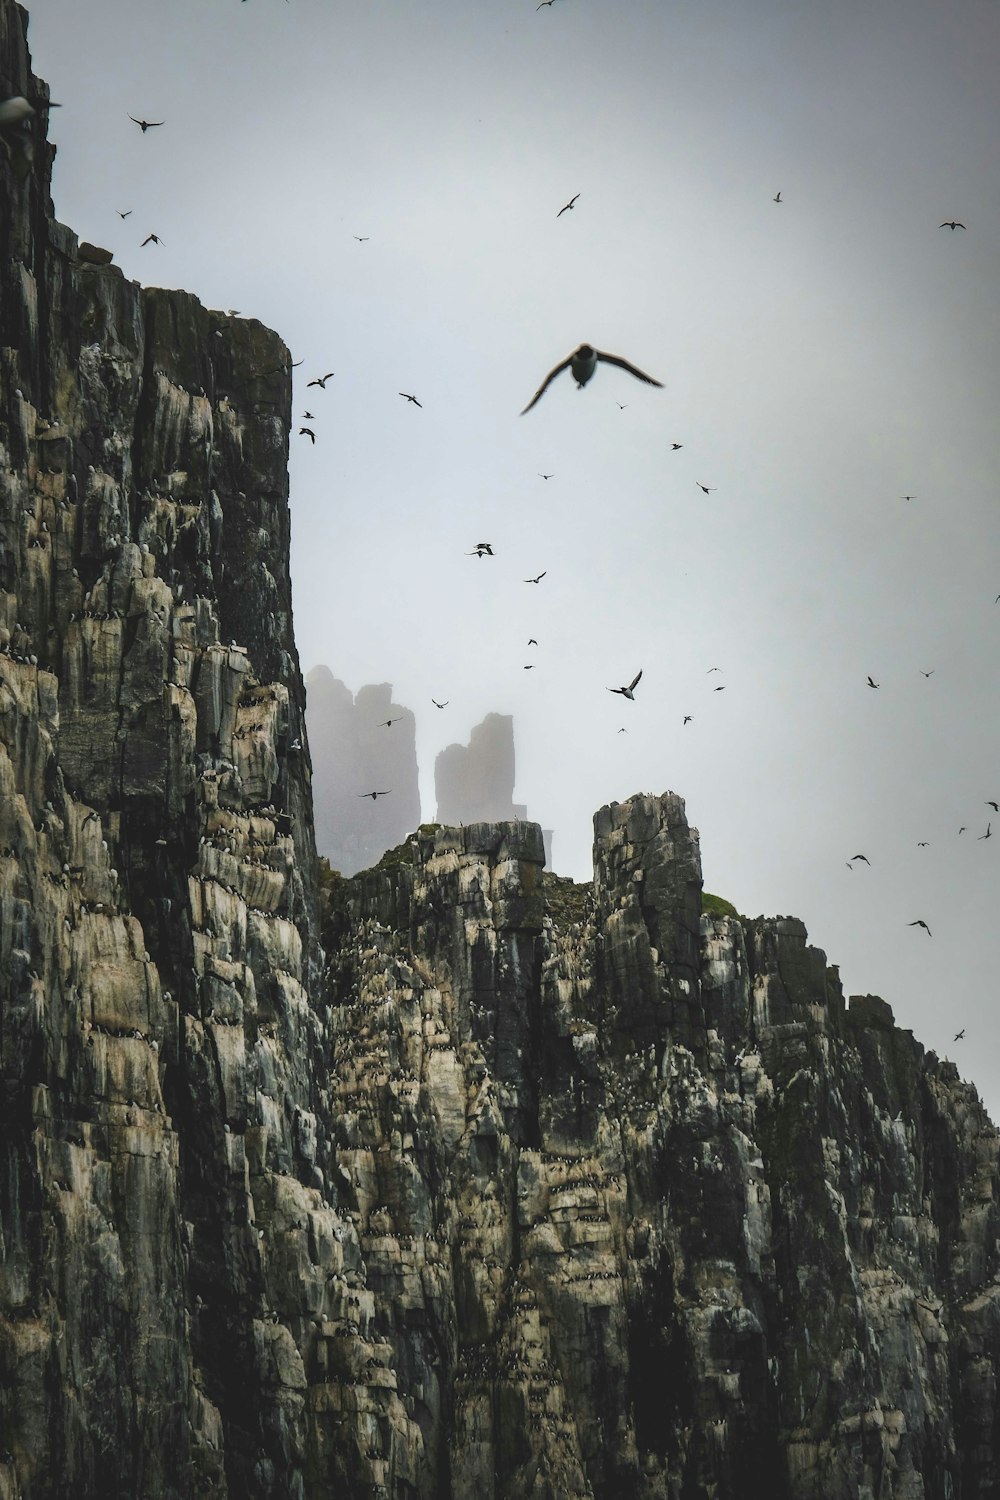 a flock of birds flying over a rocky cliff